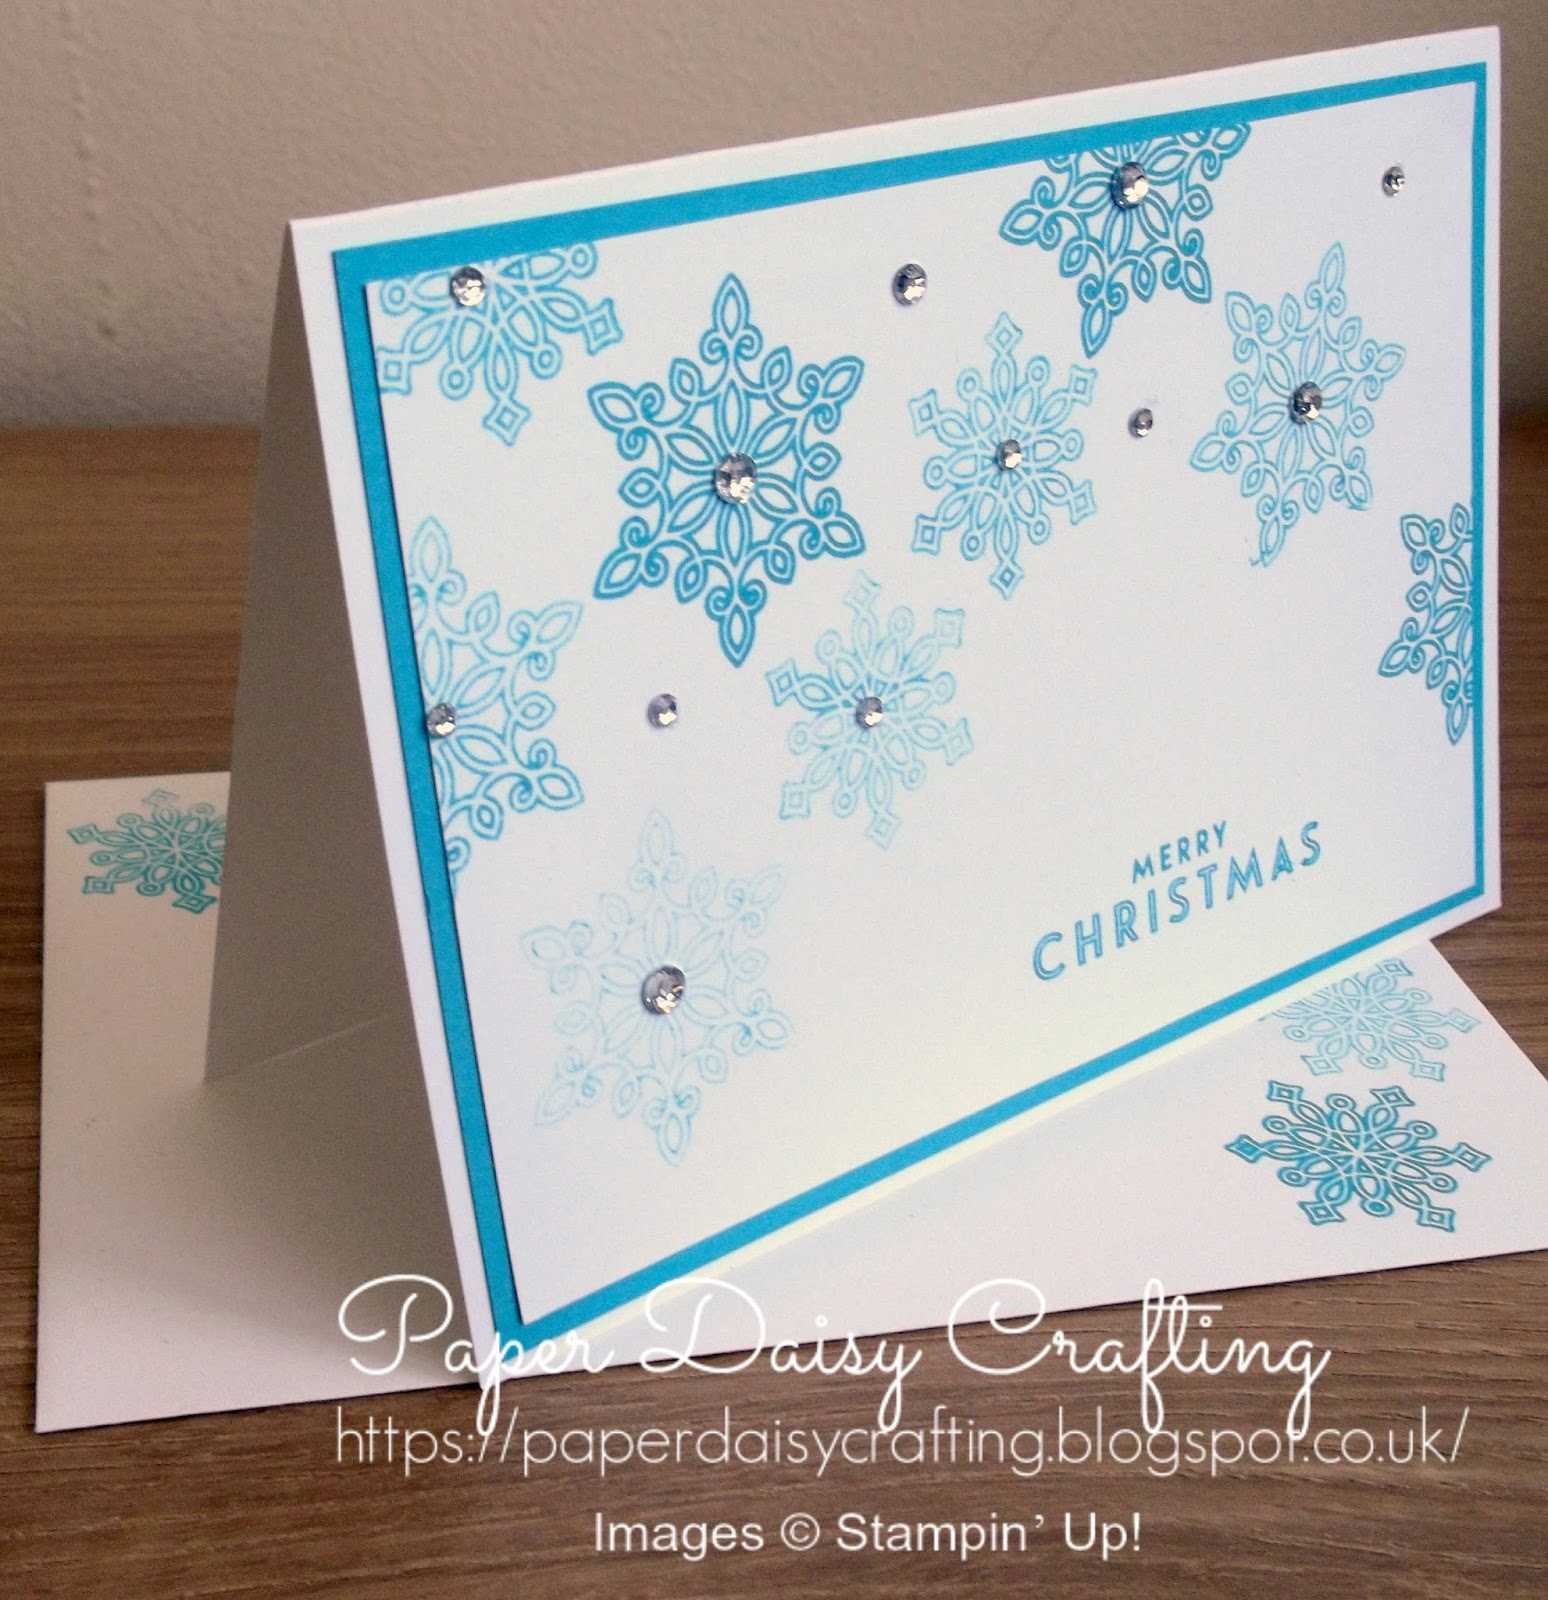 Crafting Paper Snowflakes